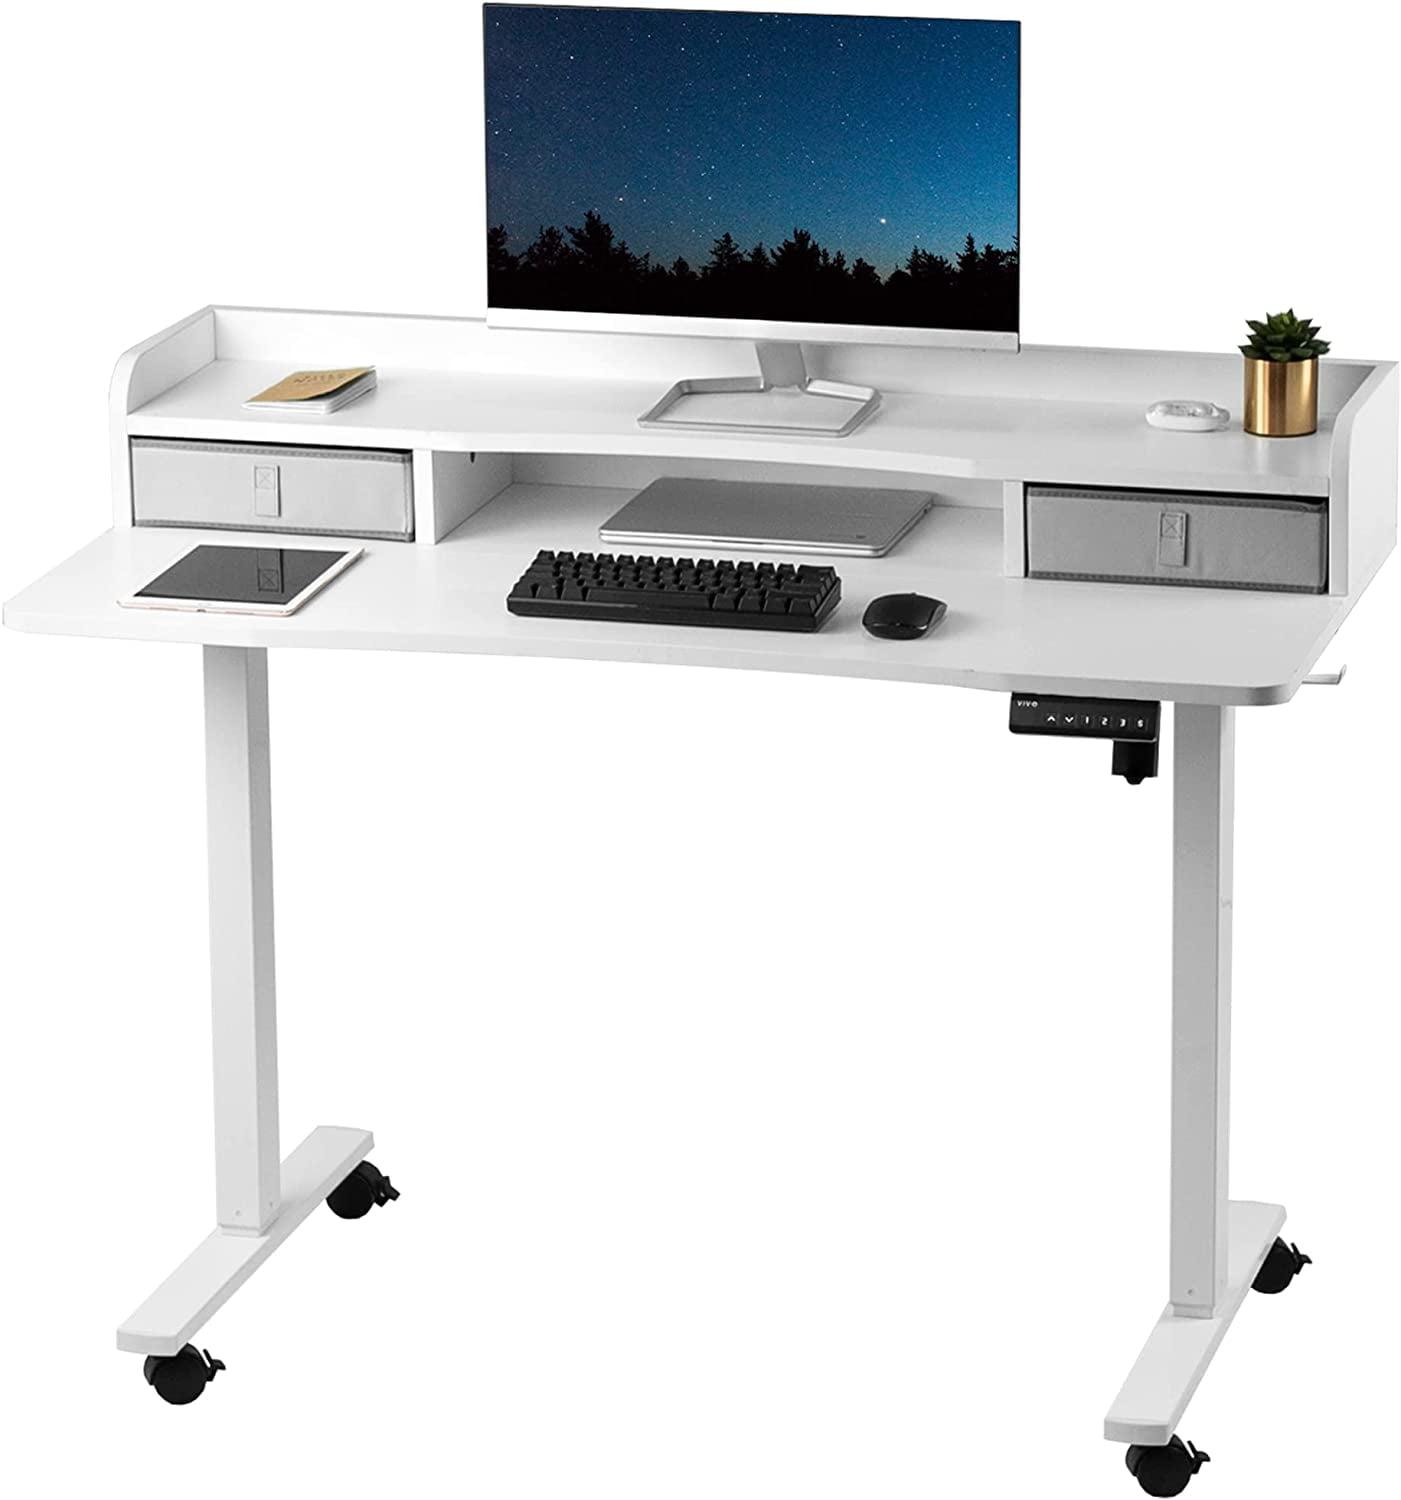 ErgoActive Electric Dual-Tier 48" White Standing Desk with Drawers